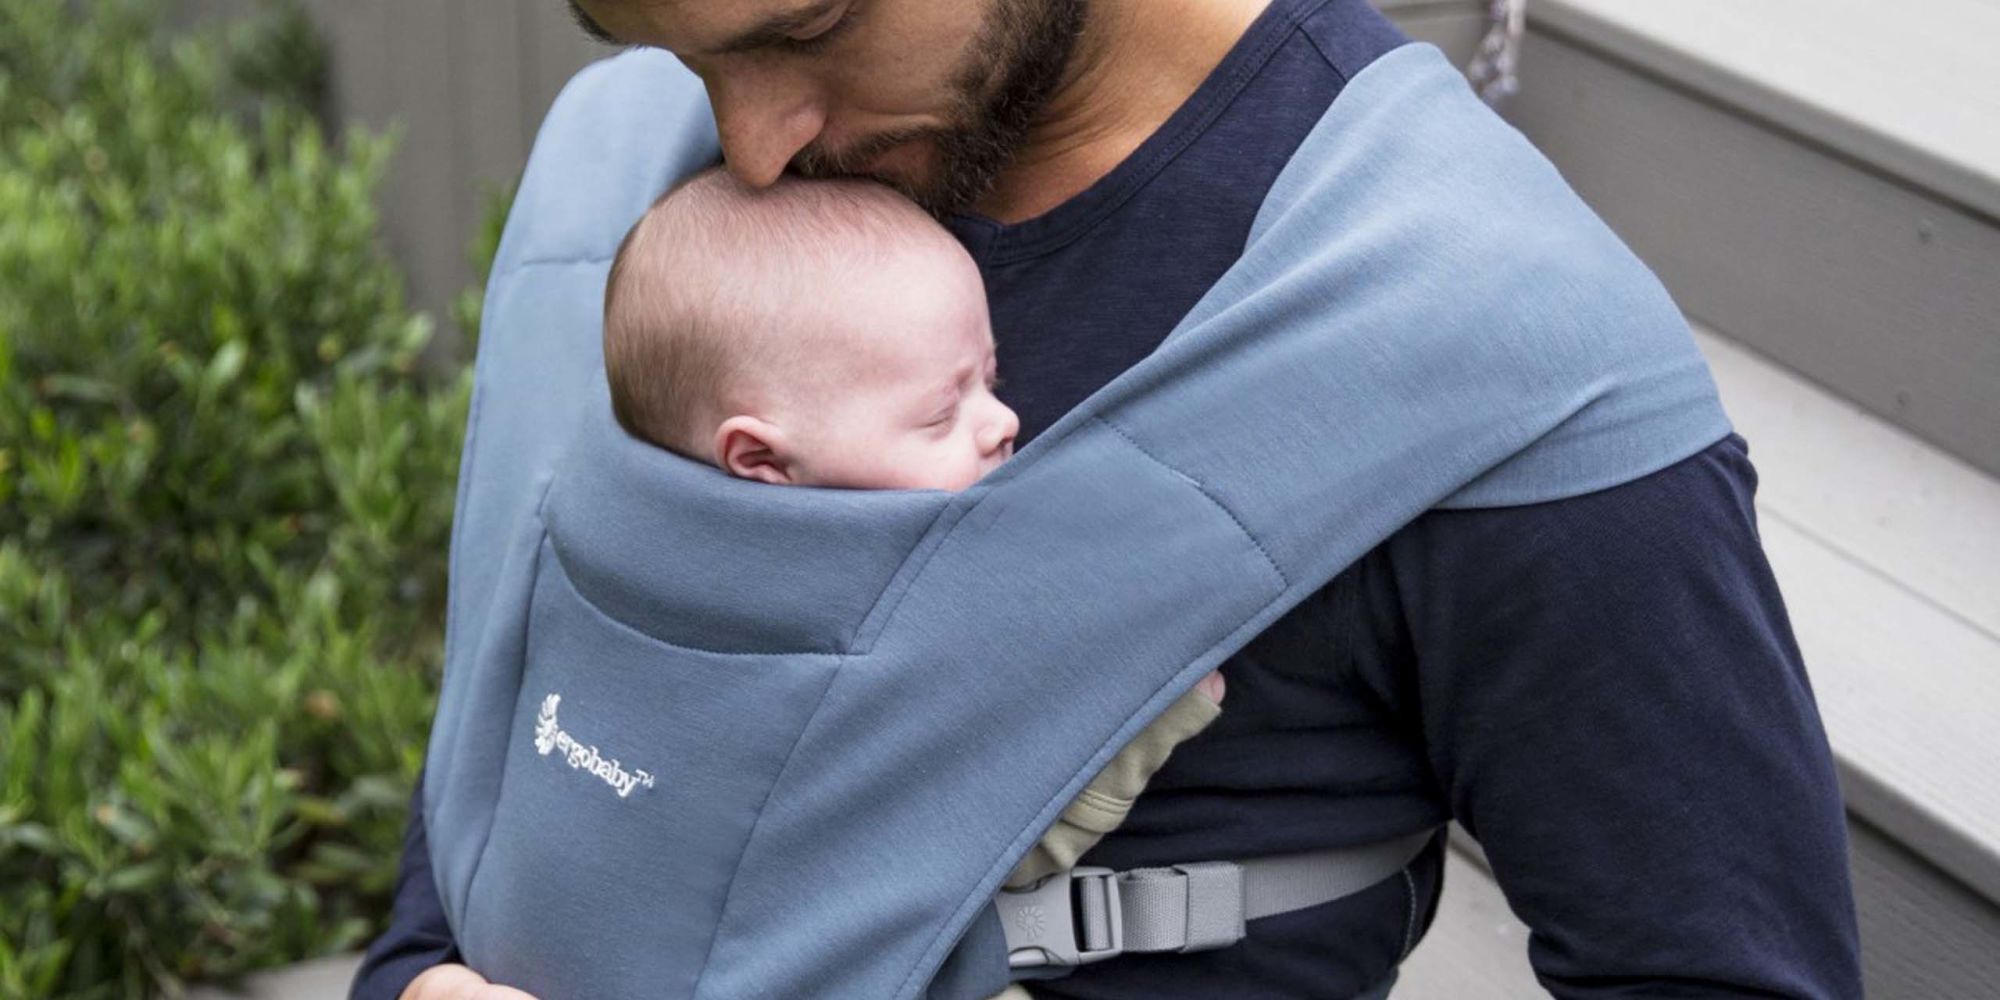 man carrying a baby in a sling